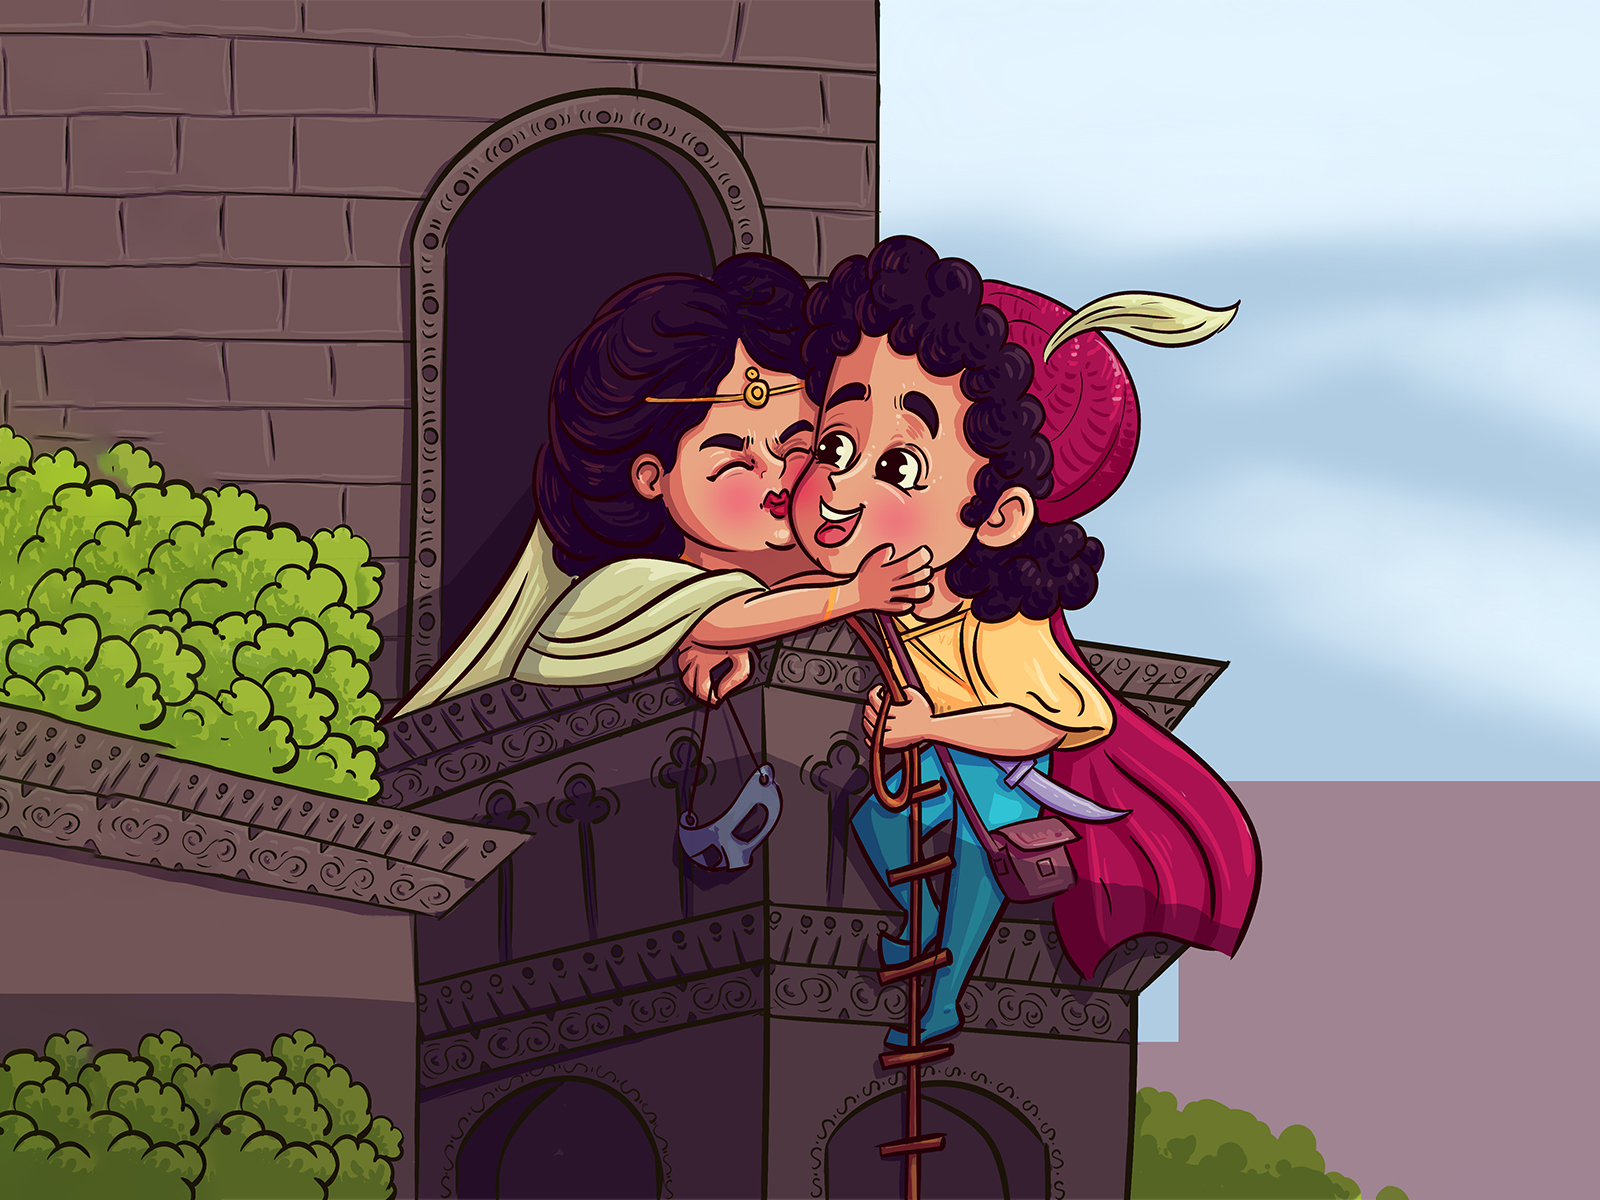 romeo and juliet animated wallpaper